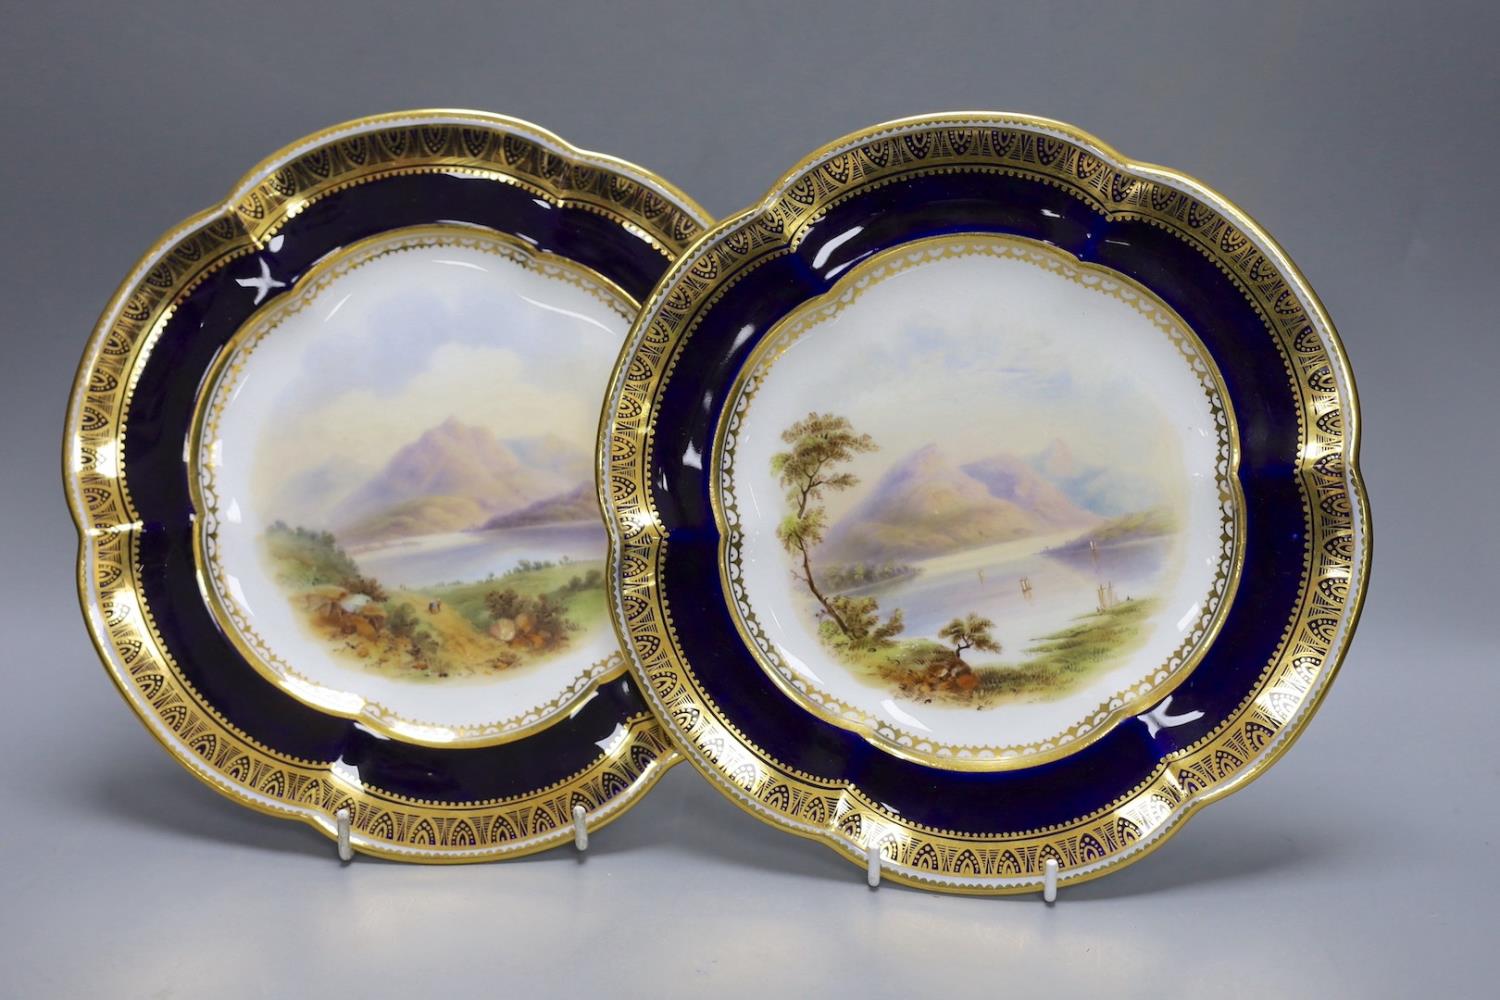 A pair of Coalport plates painted with Scottish loch scenes, Ben Lomond and Loch Ard c. 1850 cf. - Image 2 of 4